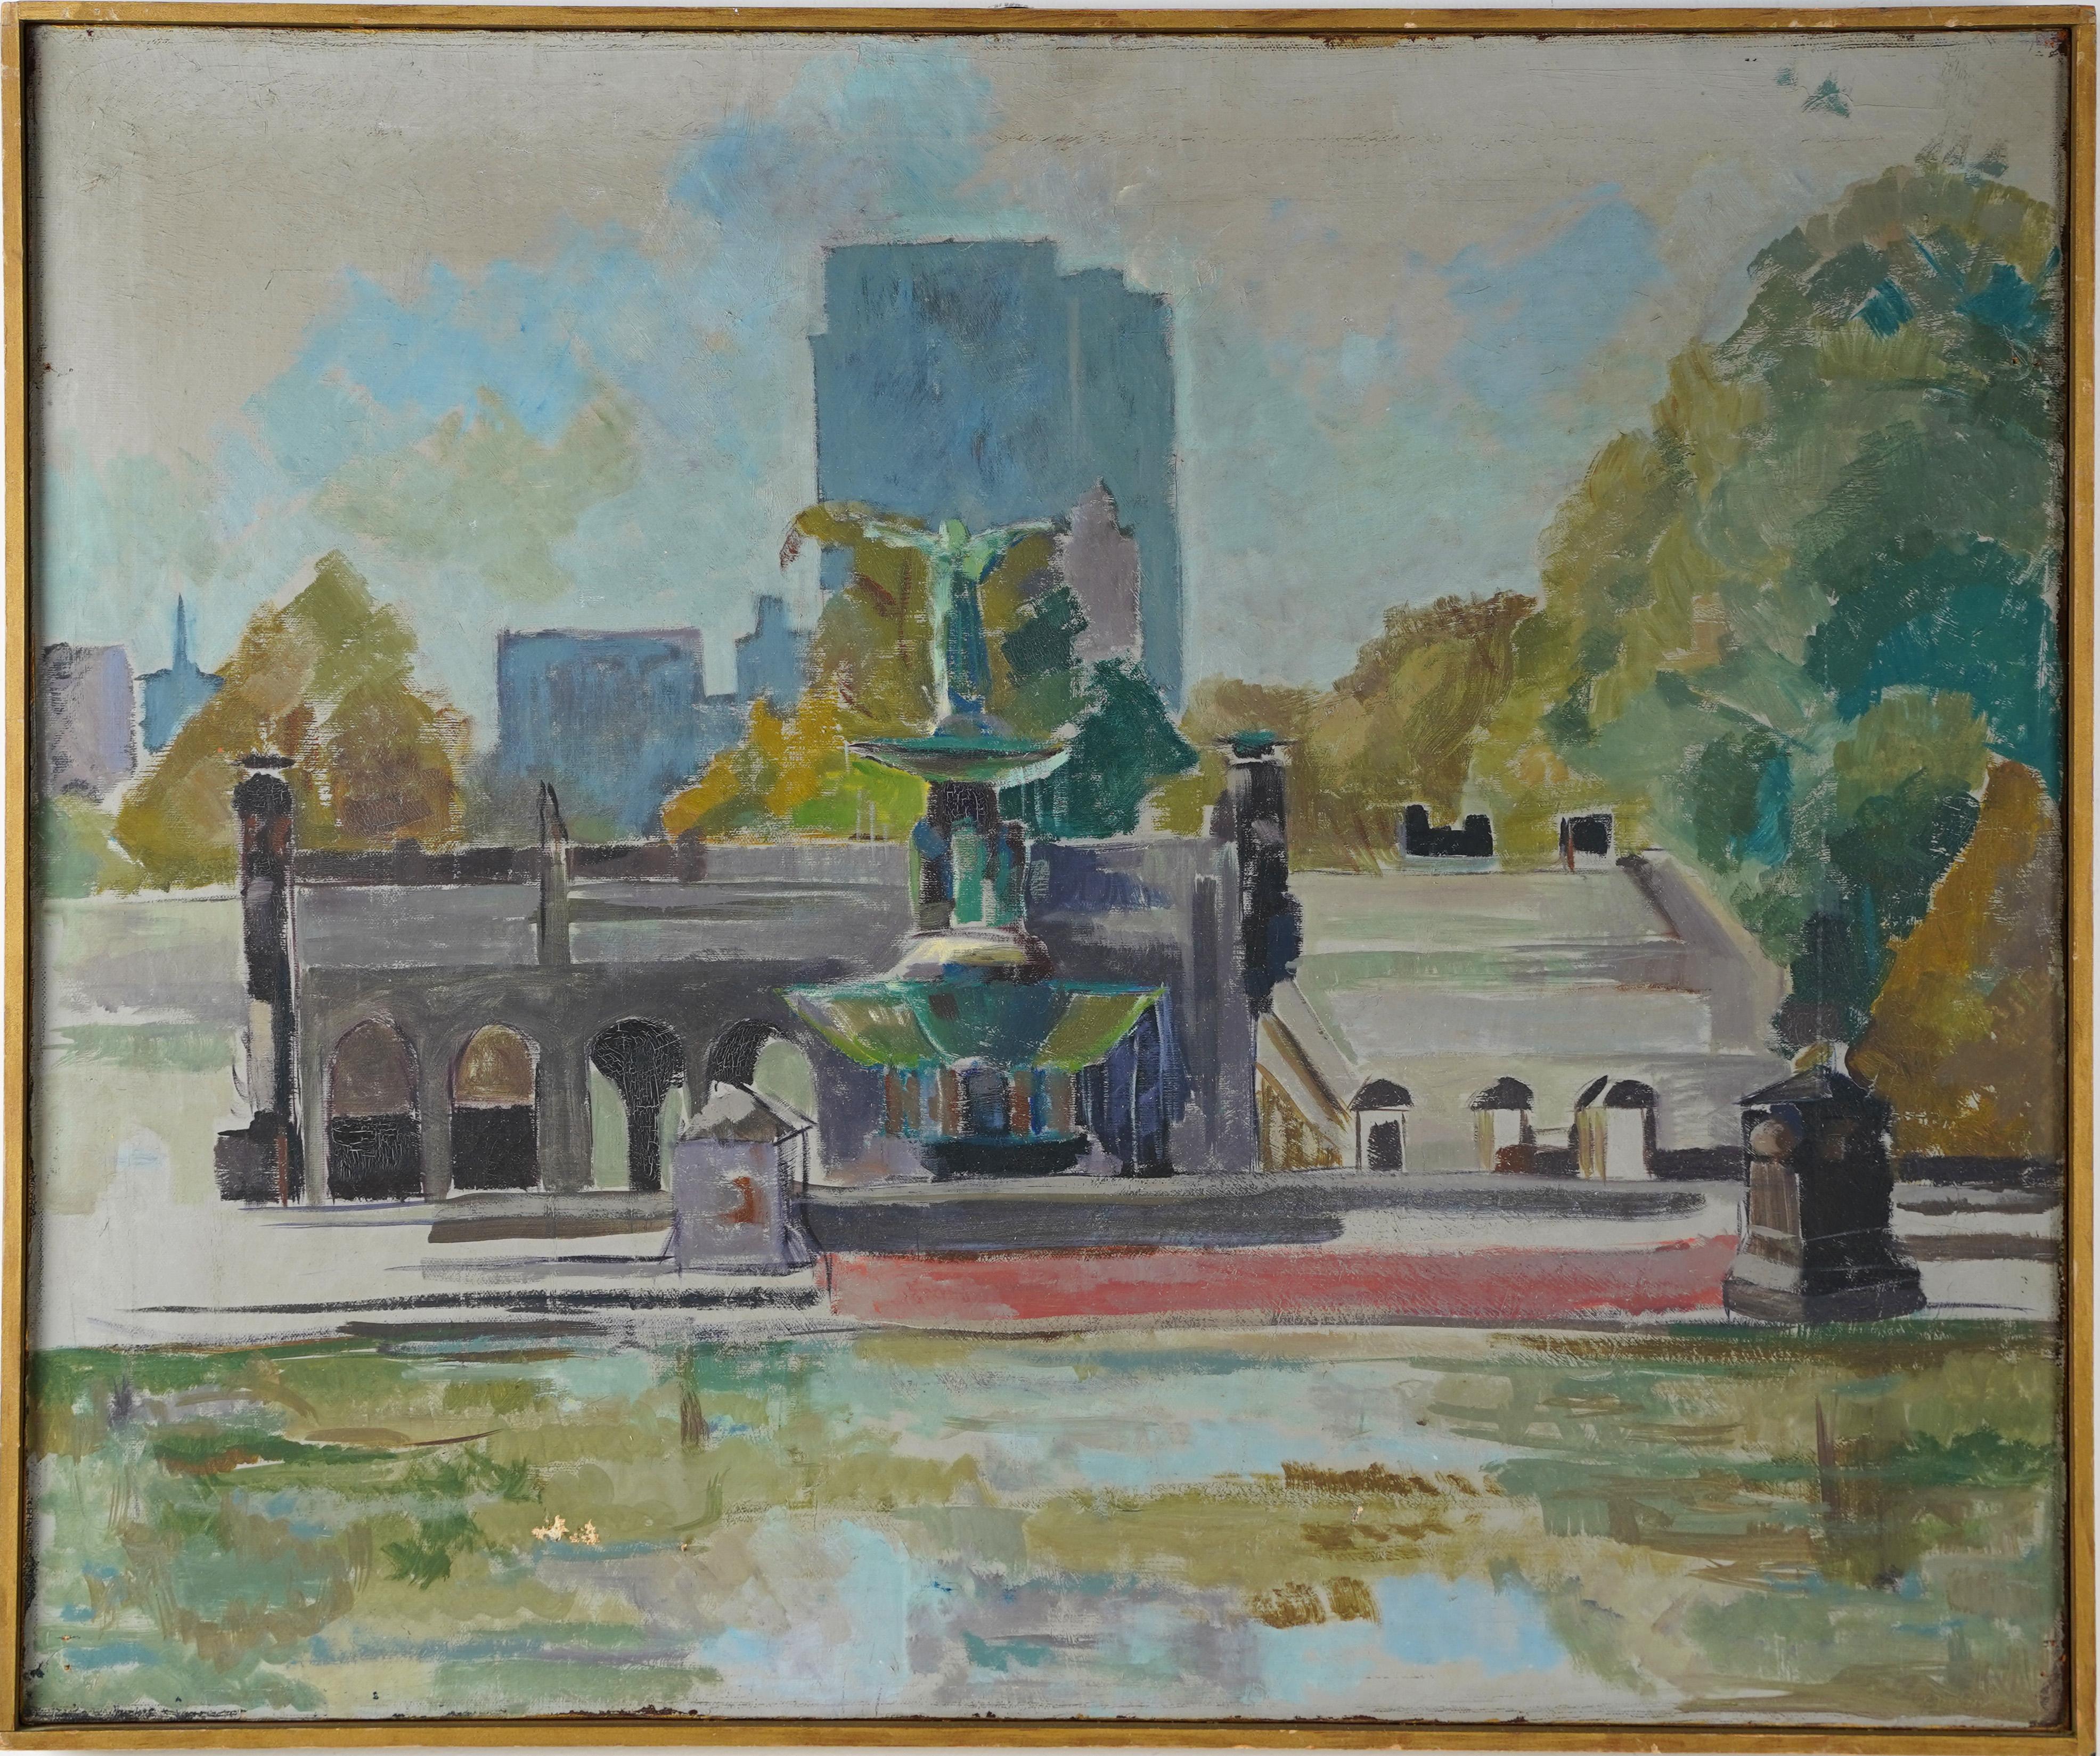 Antique American impressionist central park oil painting.  Oil on canvas. Framed.  Image size, 30L x 25H.